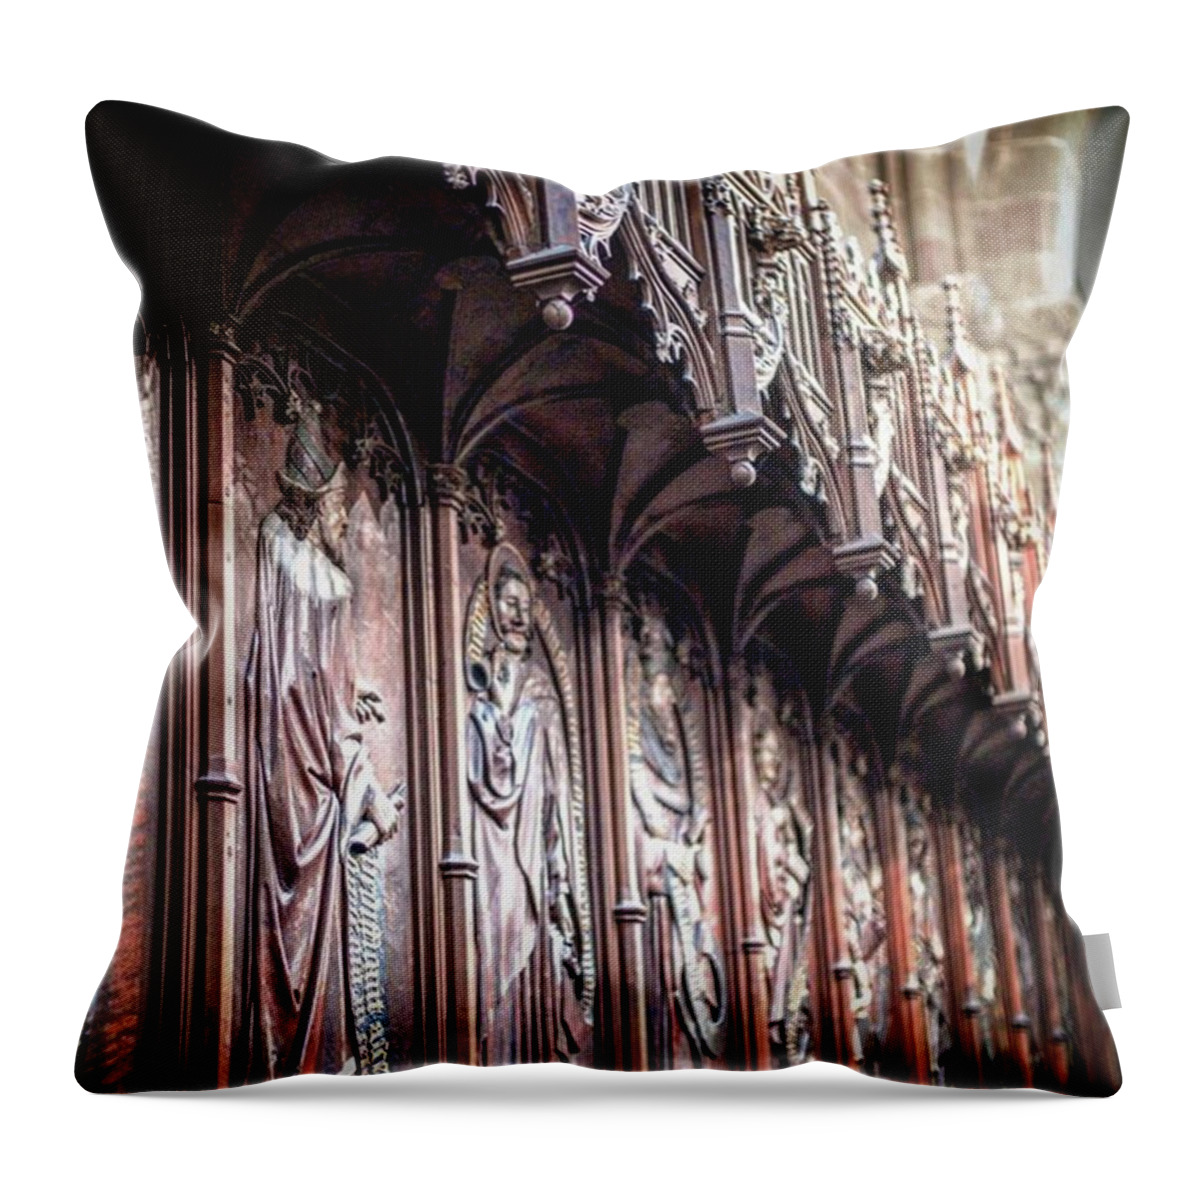 Iconography Throw Pillow featuring the photograph The Saints Of Old by Aleck Cartwright